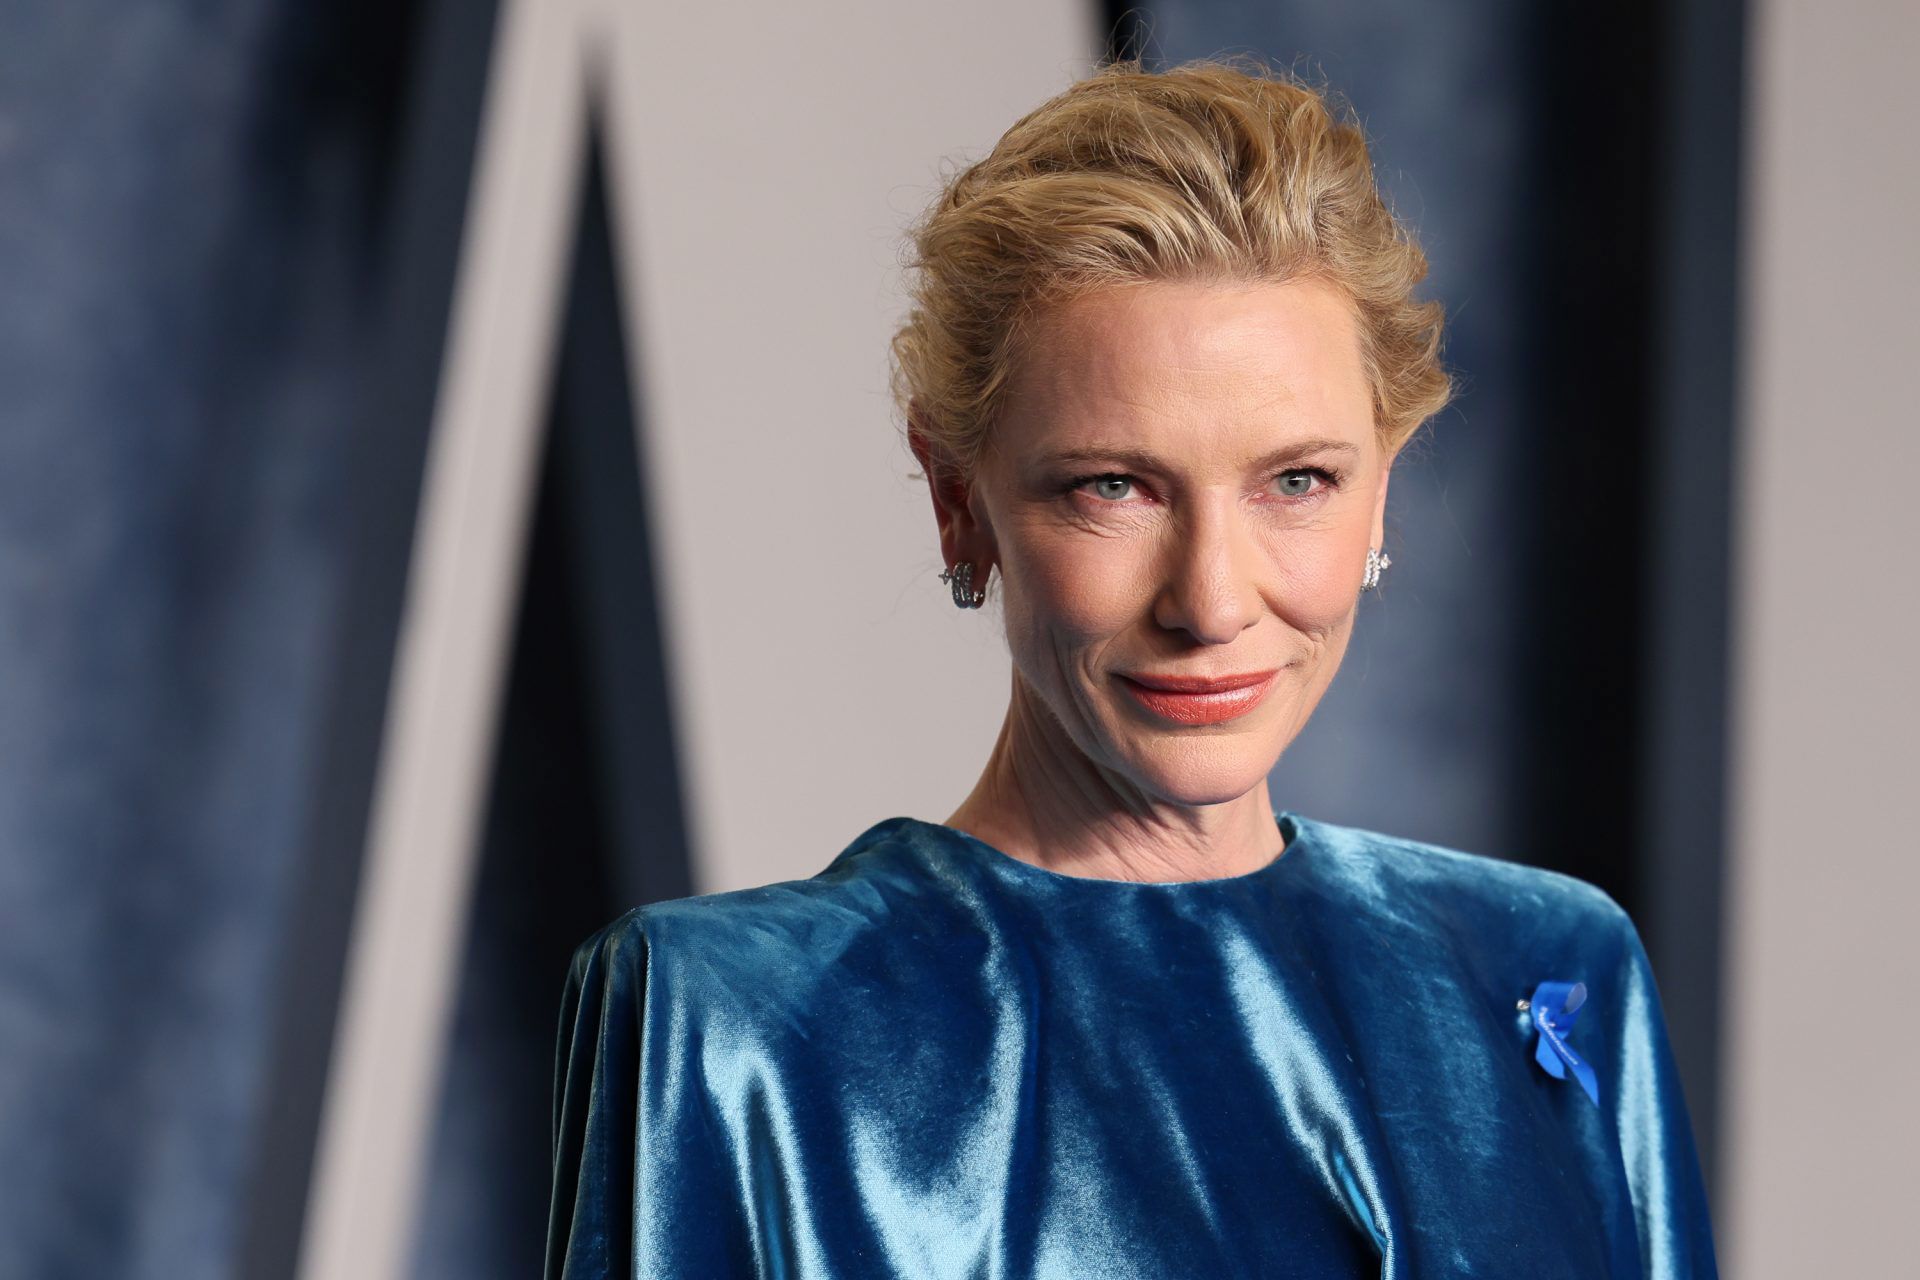 Cate Blanchett looks Hollywood chic in a red pant suit as she dons